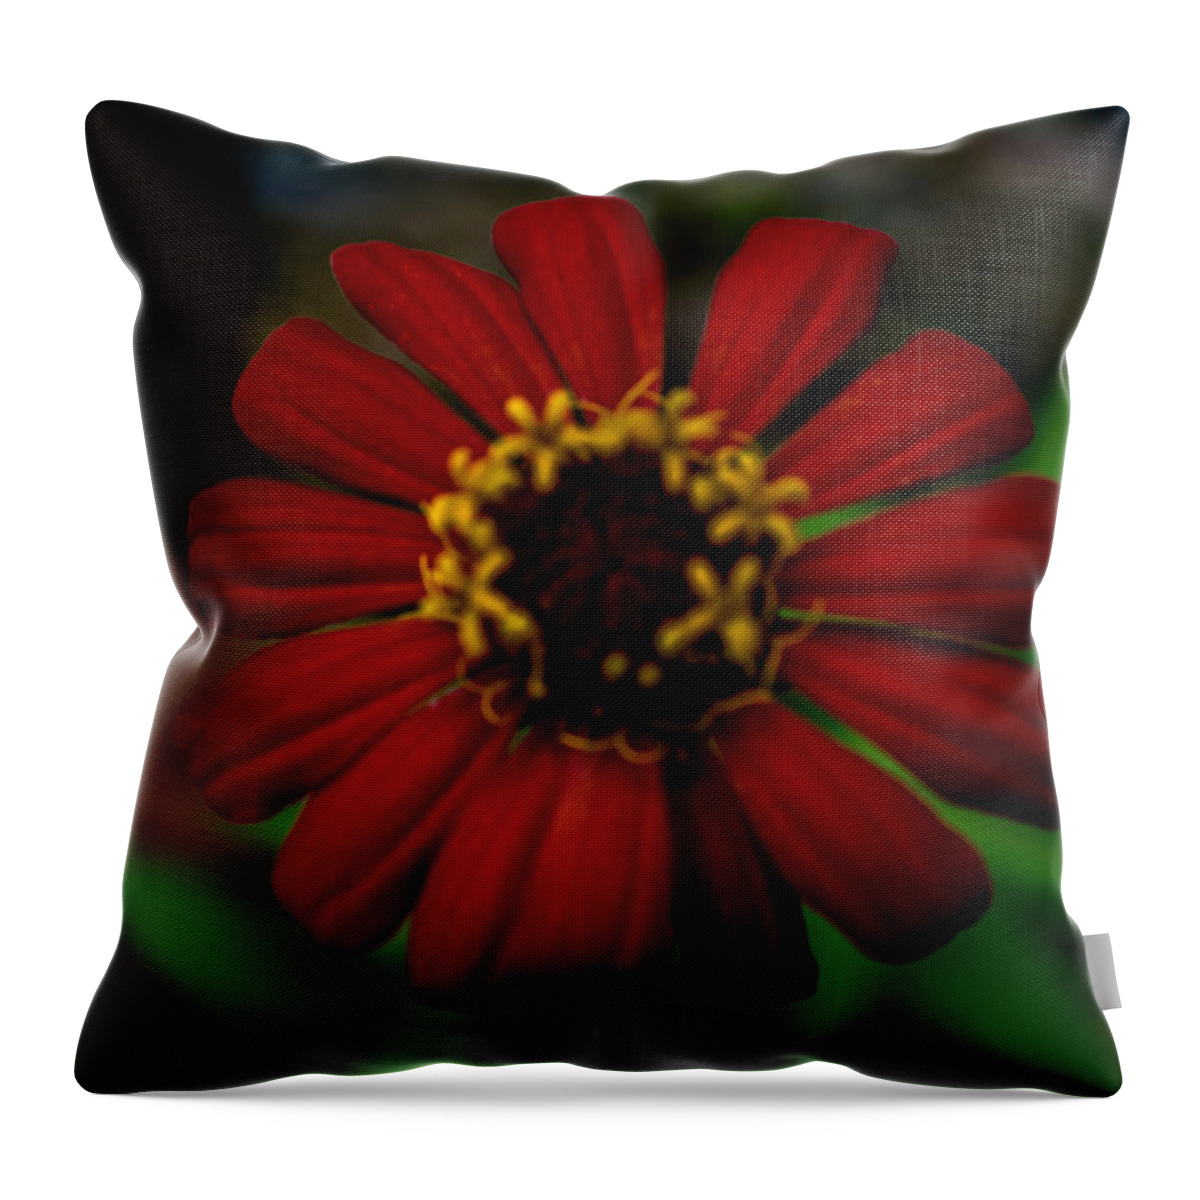 Orange Throw Pillow featuring the photograph Red Flower 8 by Totto Ponce